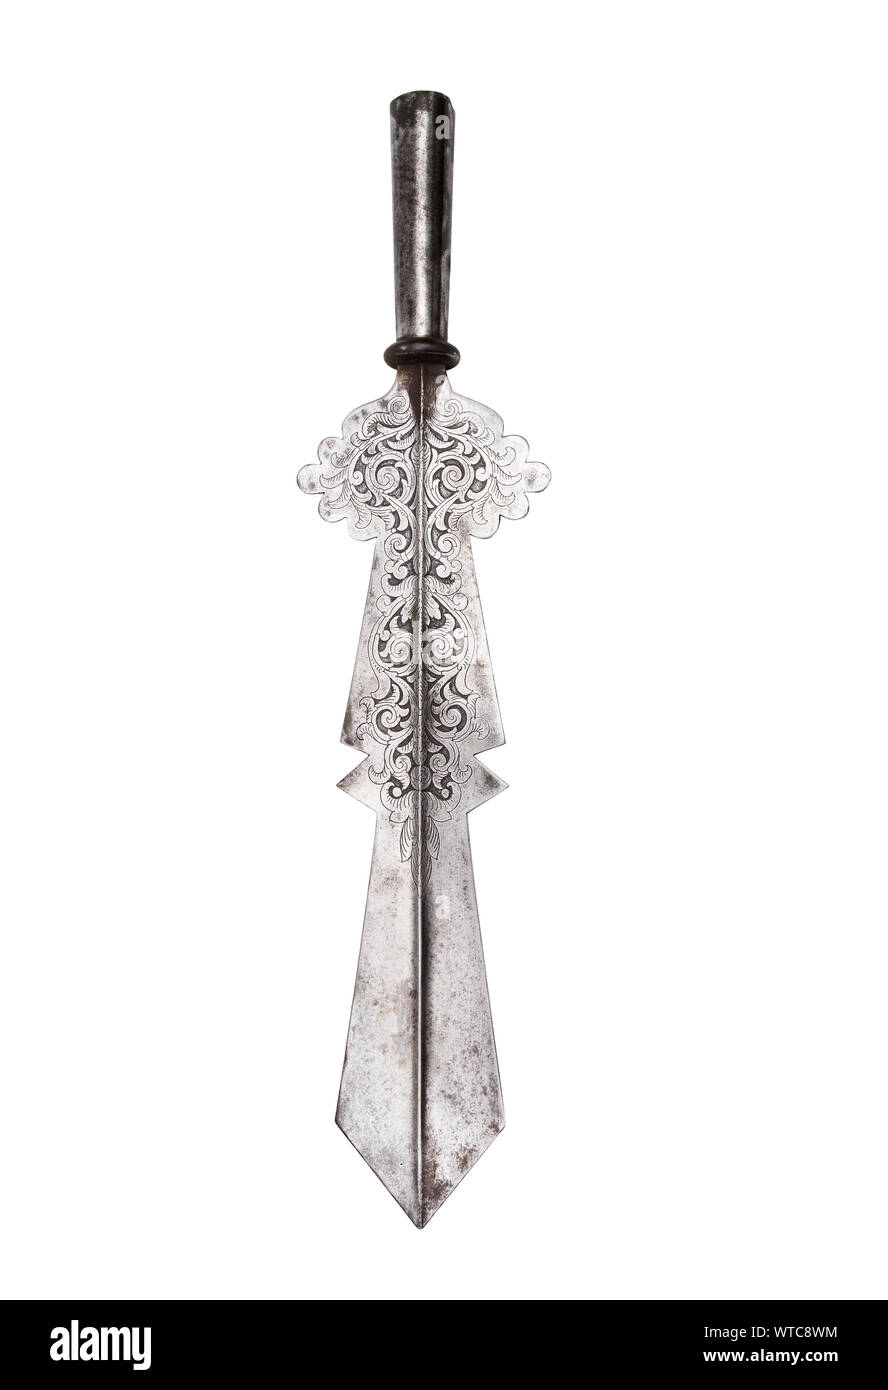 A Victorian partisan (partizan) pole–arm top in the 16th century style decorated with floral motif made with engraving. This type of pole arms was use Stock Photo